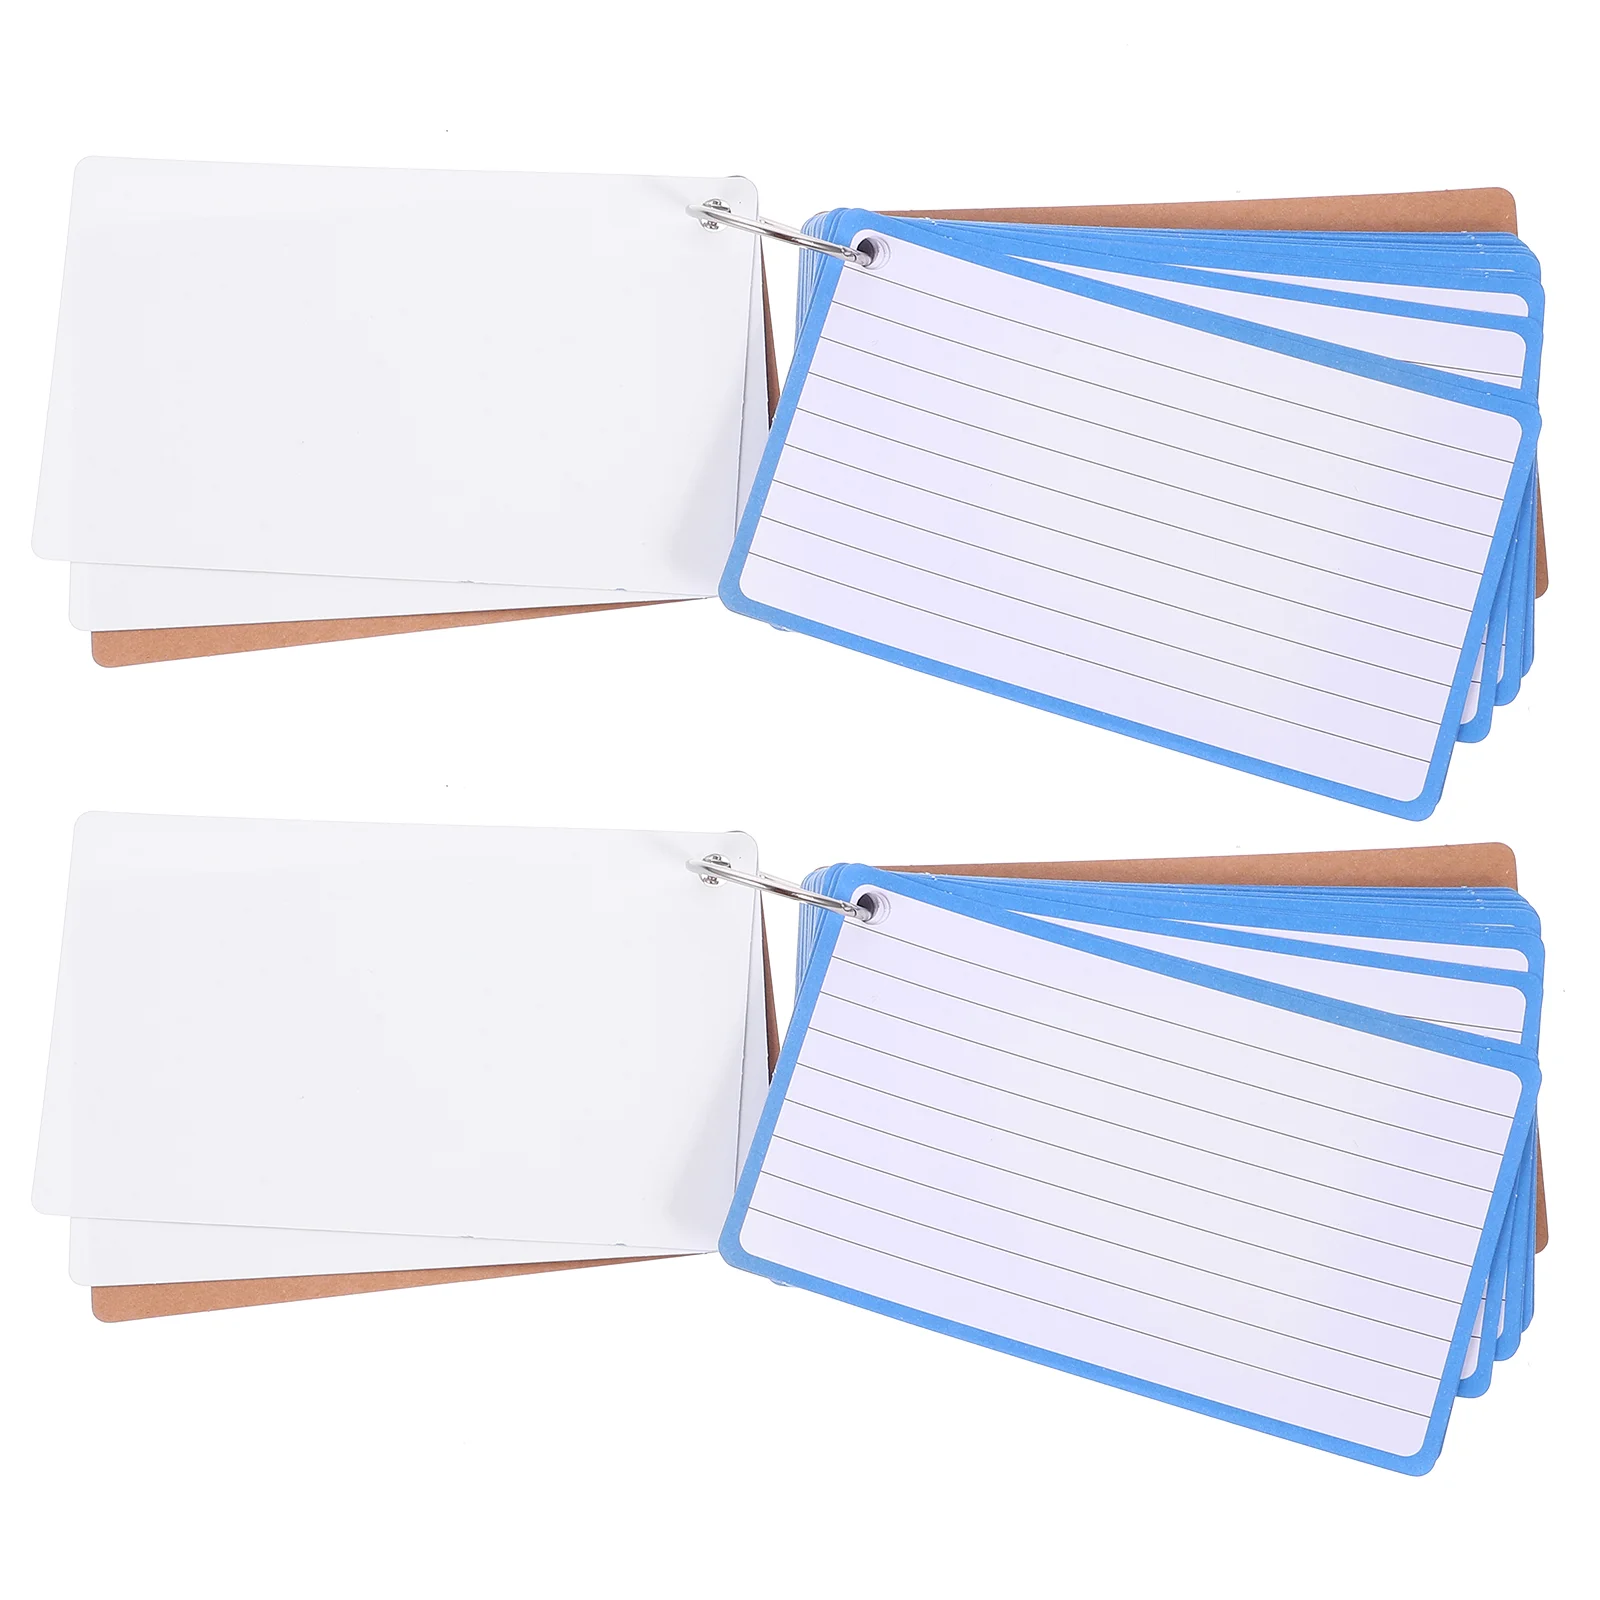 2 Books of Memo Blank Cards Index Cards Lined Cards Diy Graffiti Cards Colored Index Card